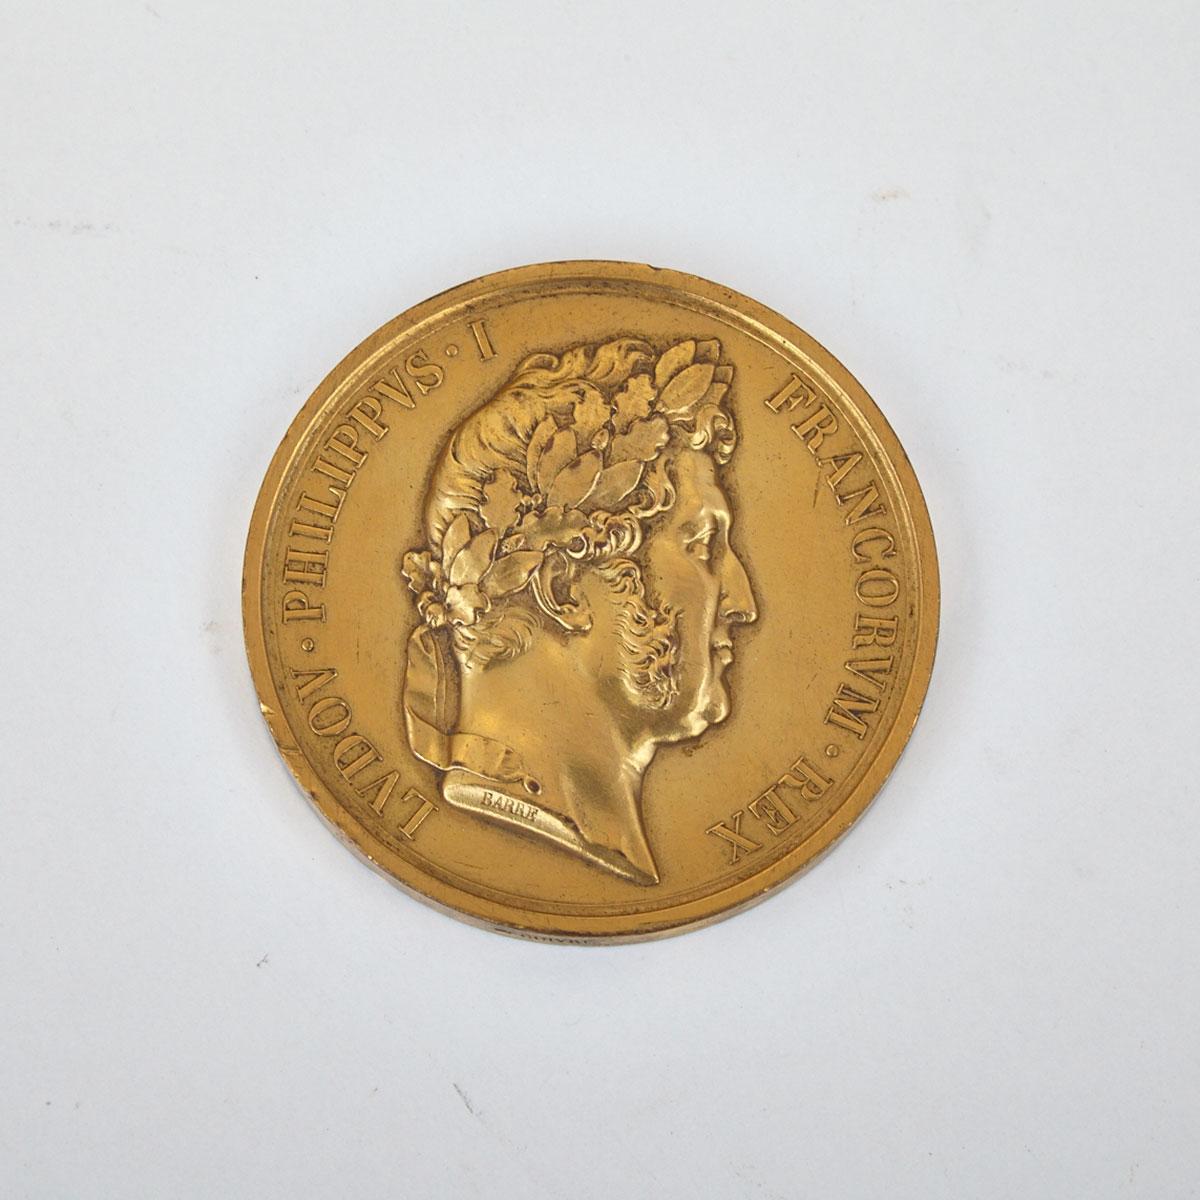 French Gilt Copper Medal Commemorating the 1840 Paris Funeral of Napoleon I at Invalides, 1846